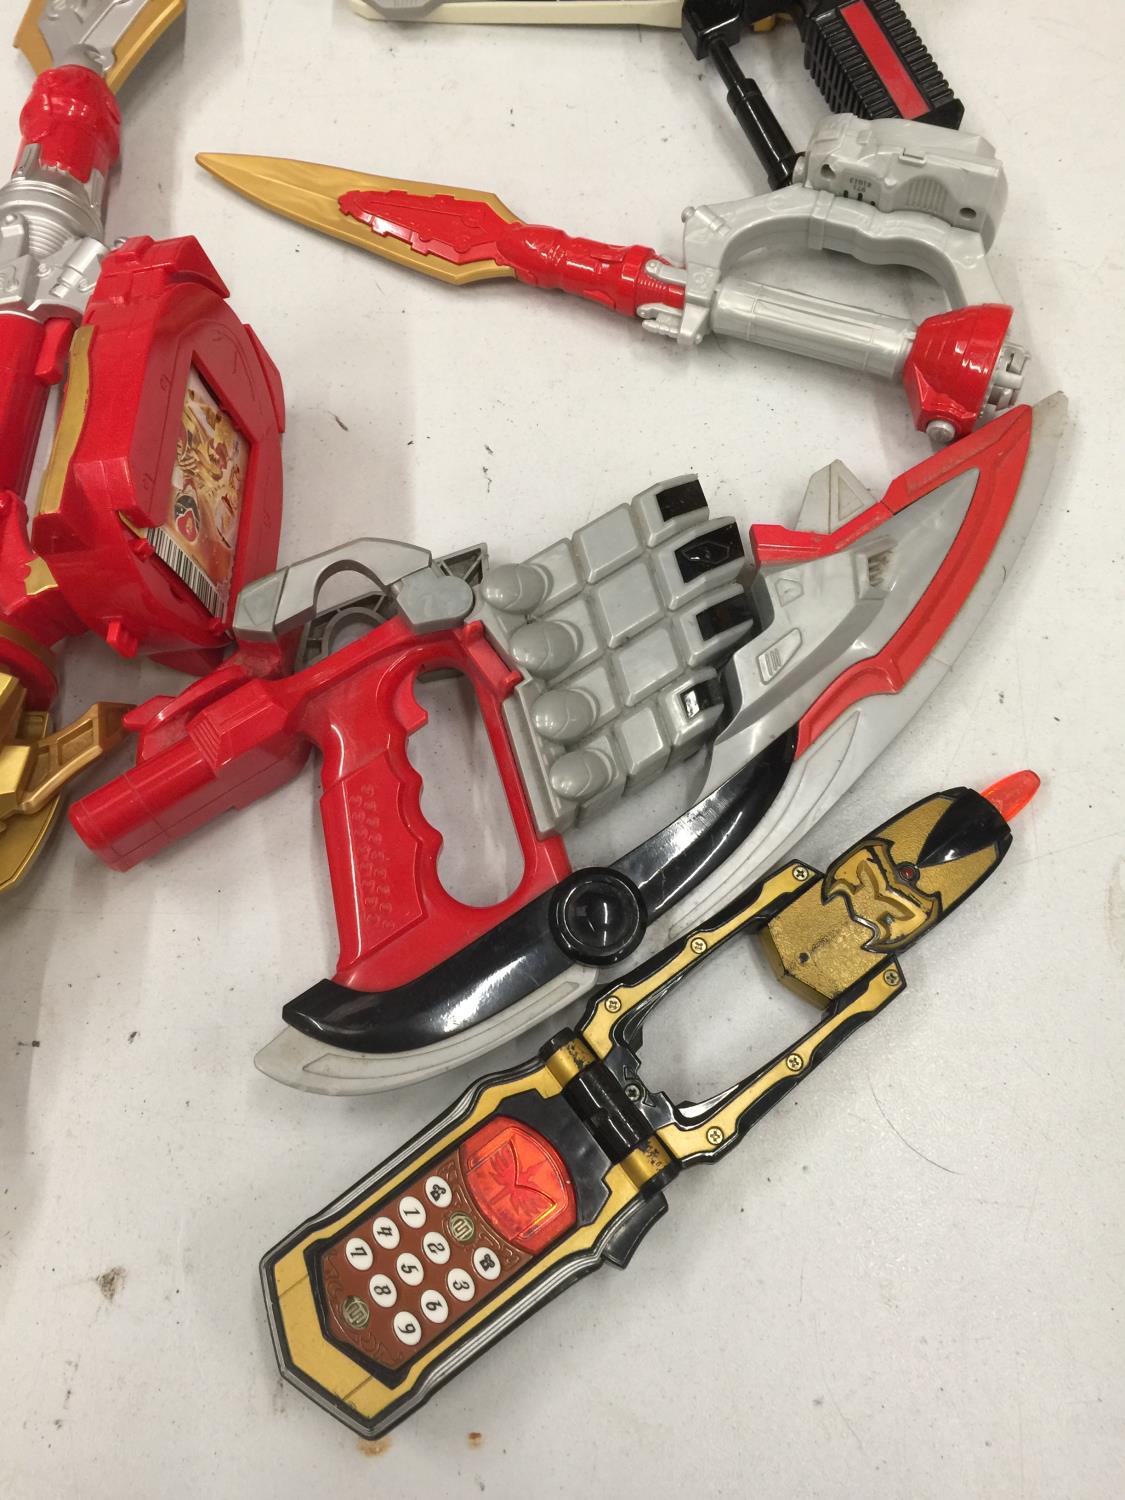 A QUANTITY OF POWER RANGER WEAPONS AND ACCESSORIES TO INCLUDE A PHONE, GUN, SWORDS, ETC - Image 2 of 3